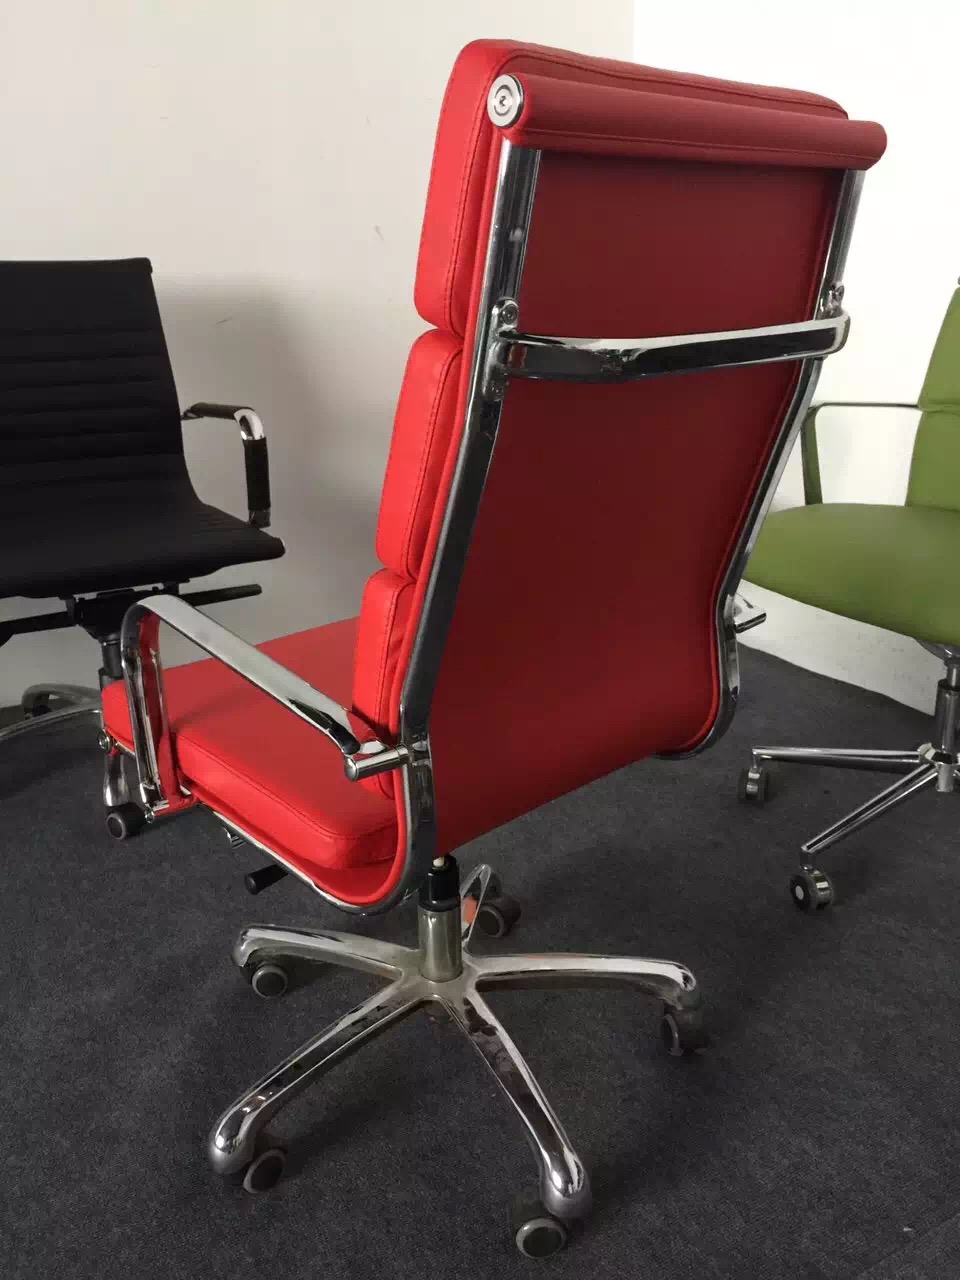 Solid Eames High back pu pvc red leather executive swivel office chair